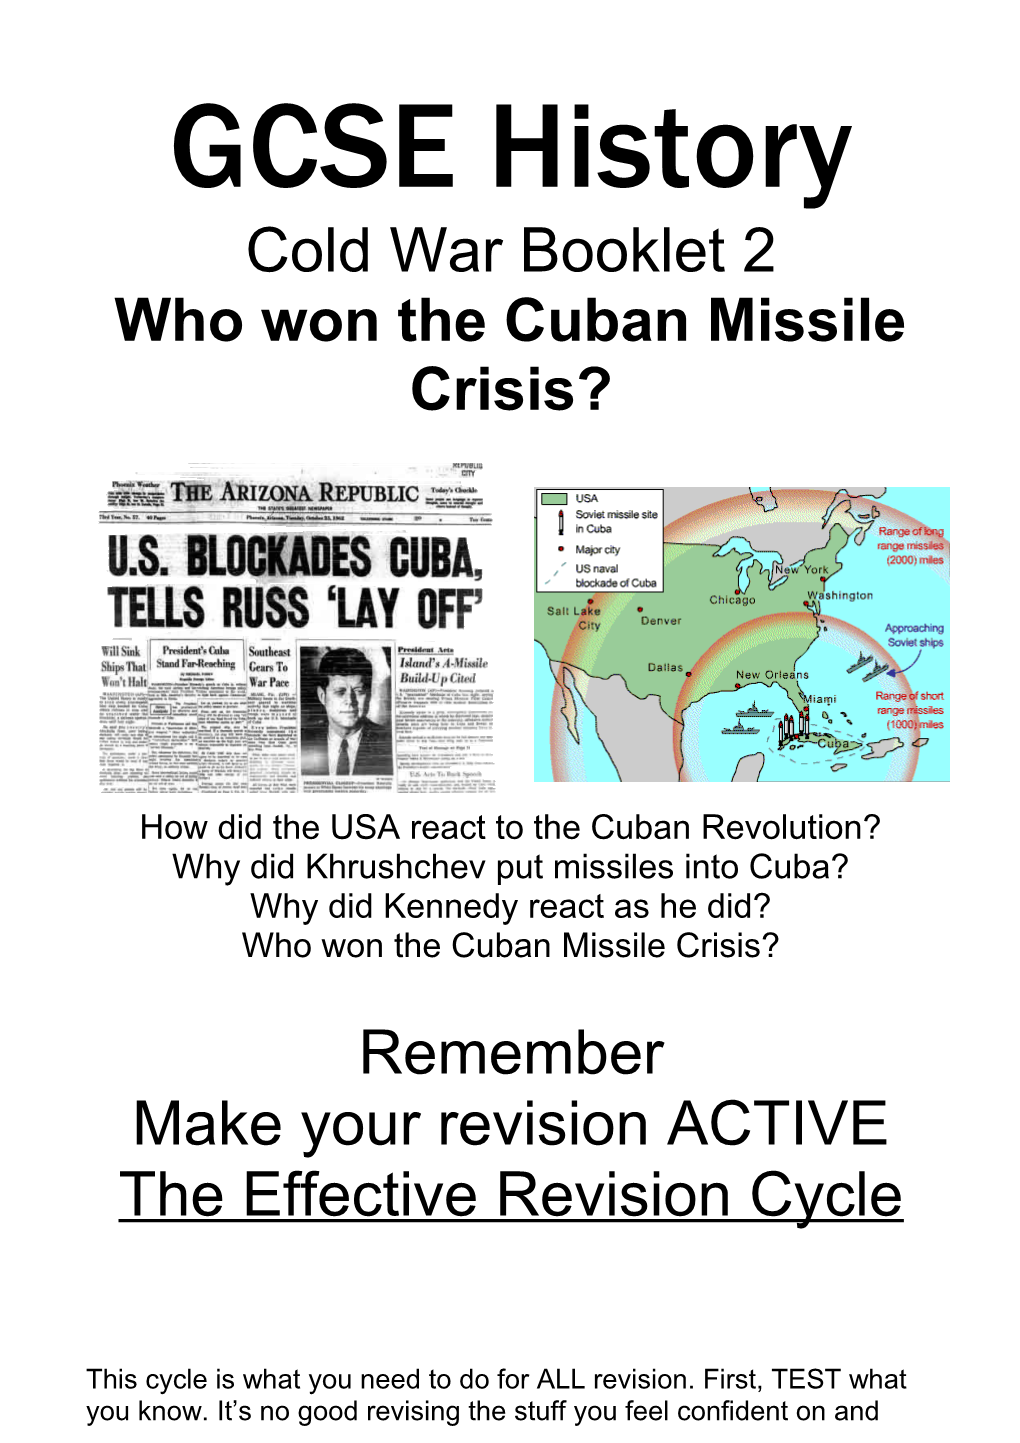 How Did the USA React to the Cuban Revolution?